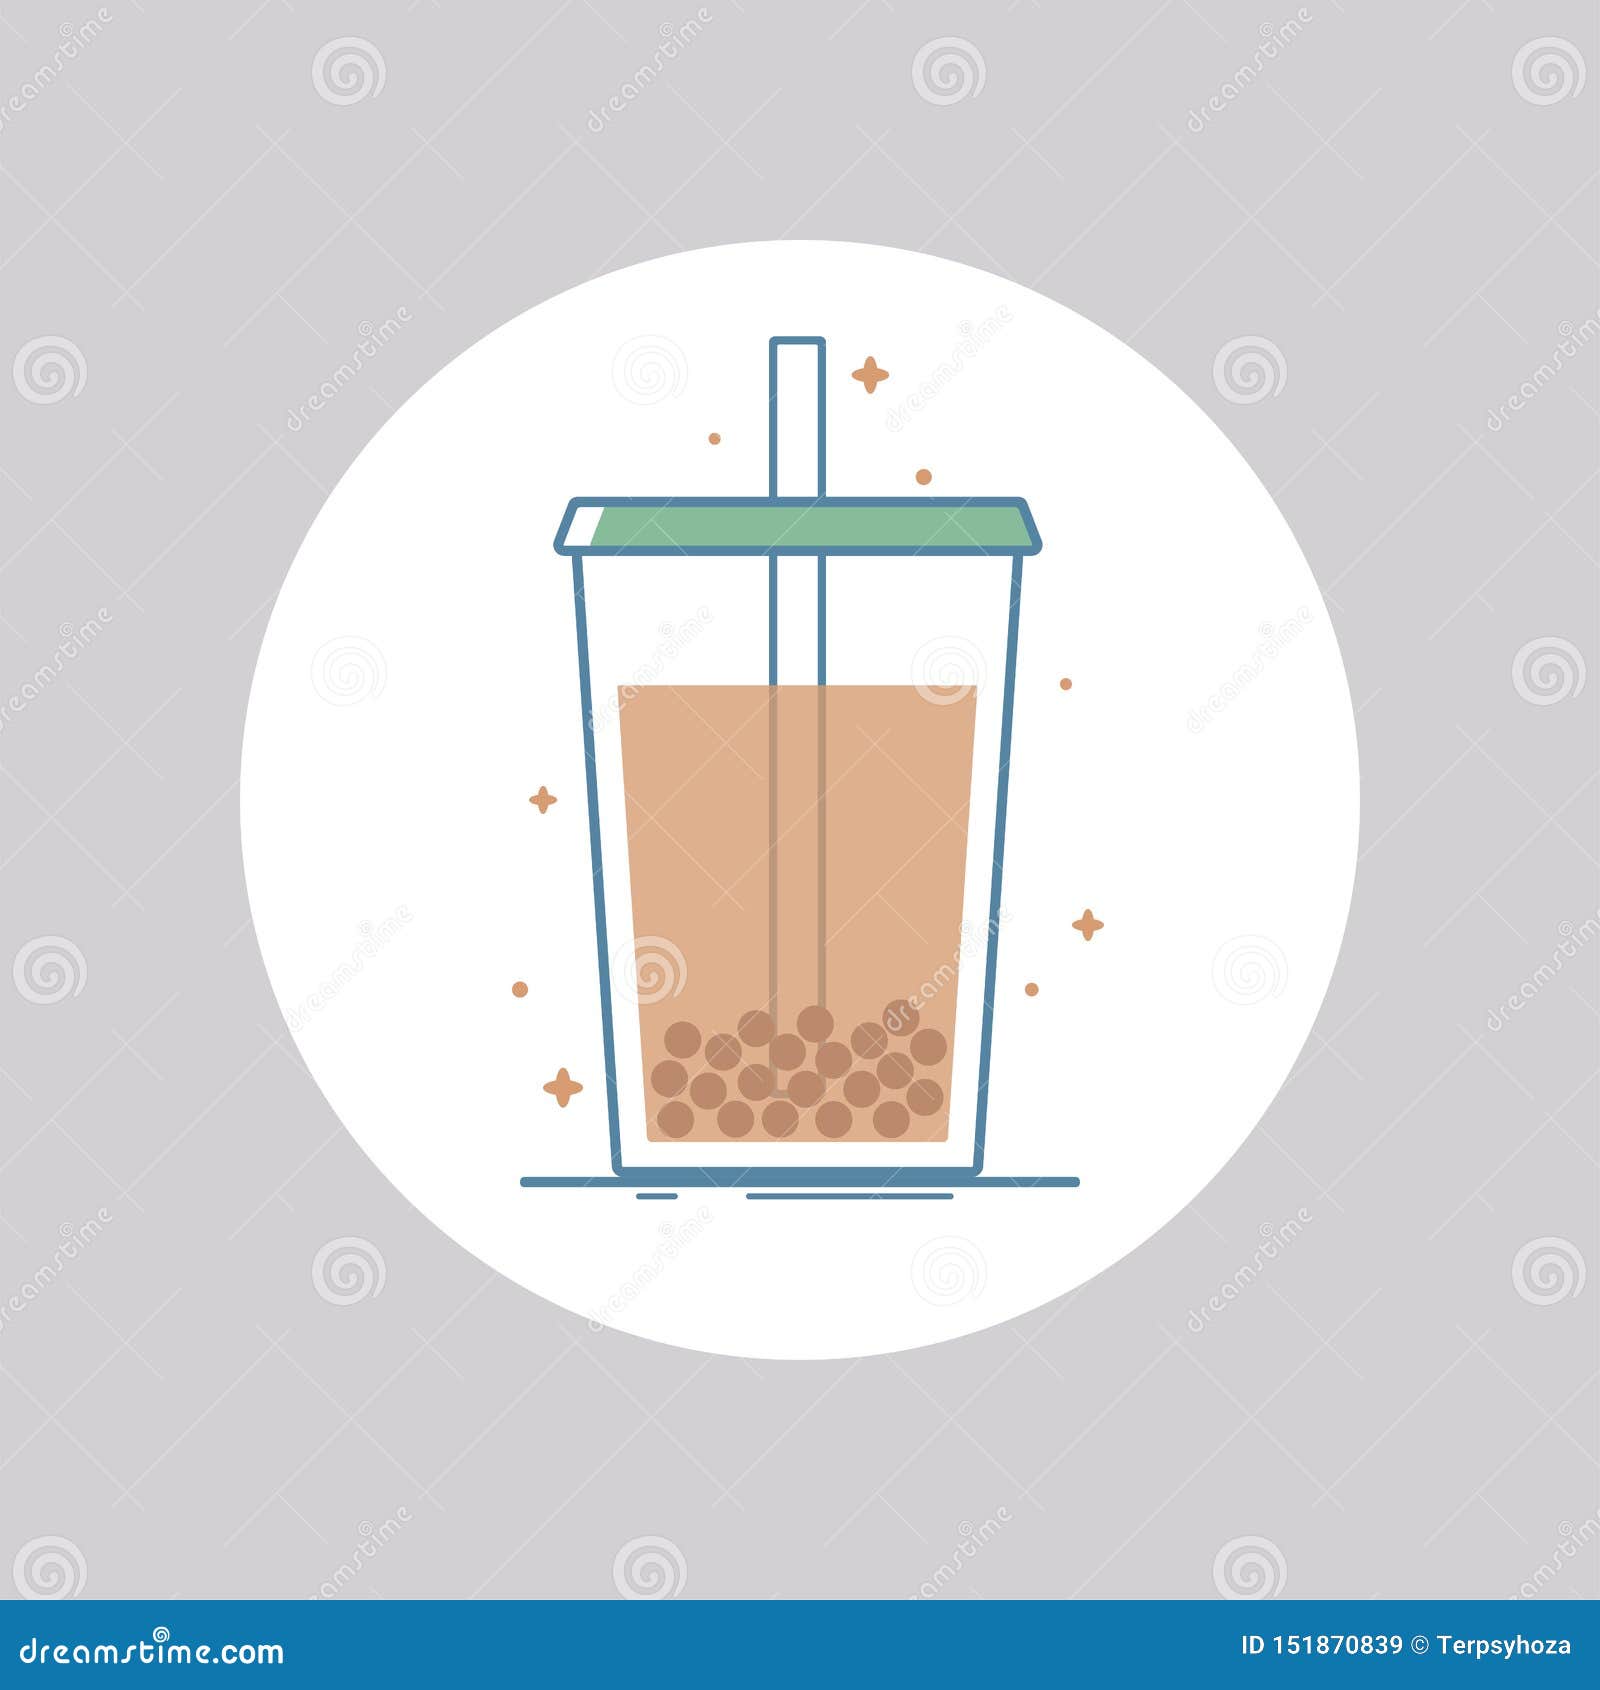 https://thumbs.dreamstime.com/z/bubble-tea-vector-icon-cup-take-away-isolated-circle-flat-design-151870839.jpg